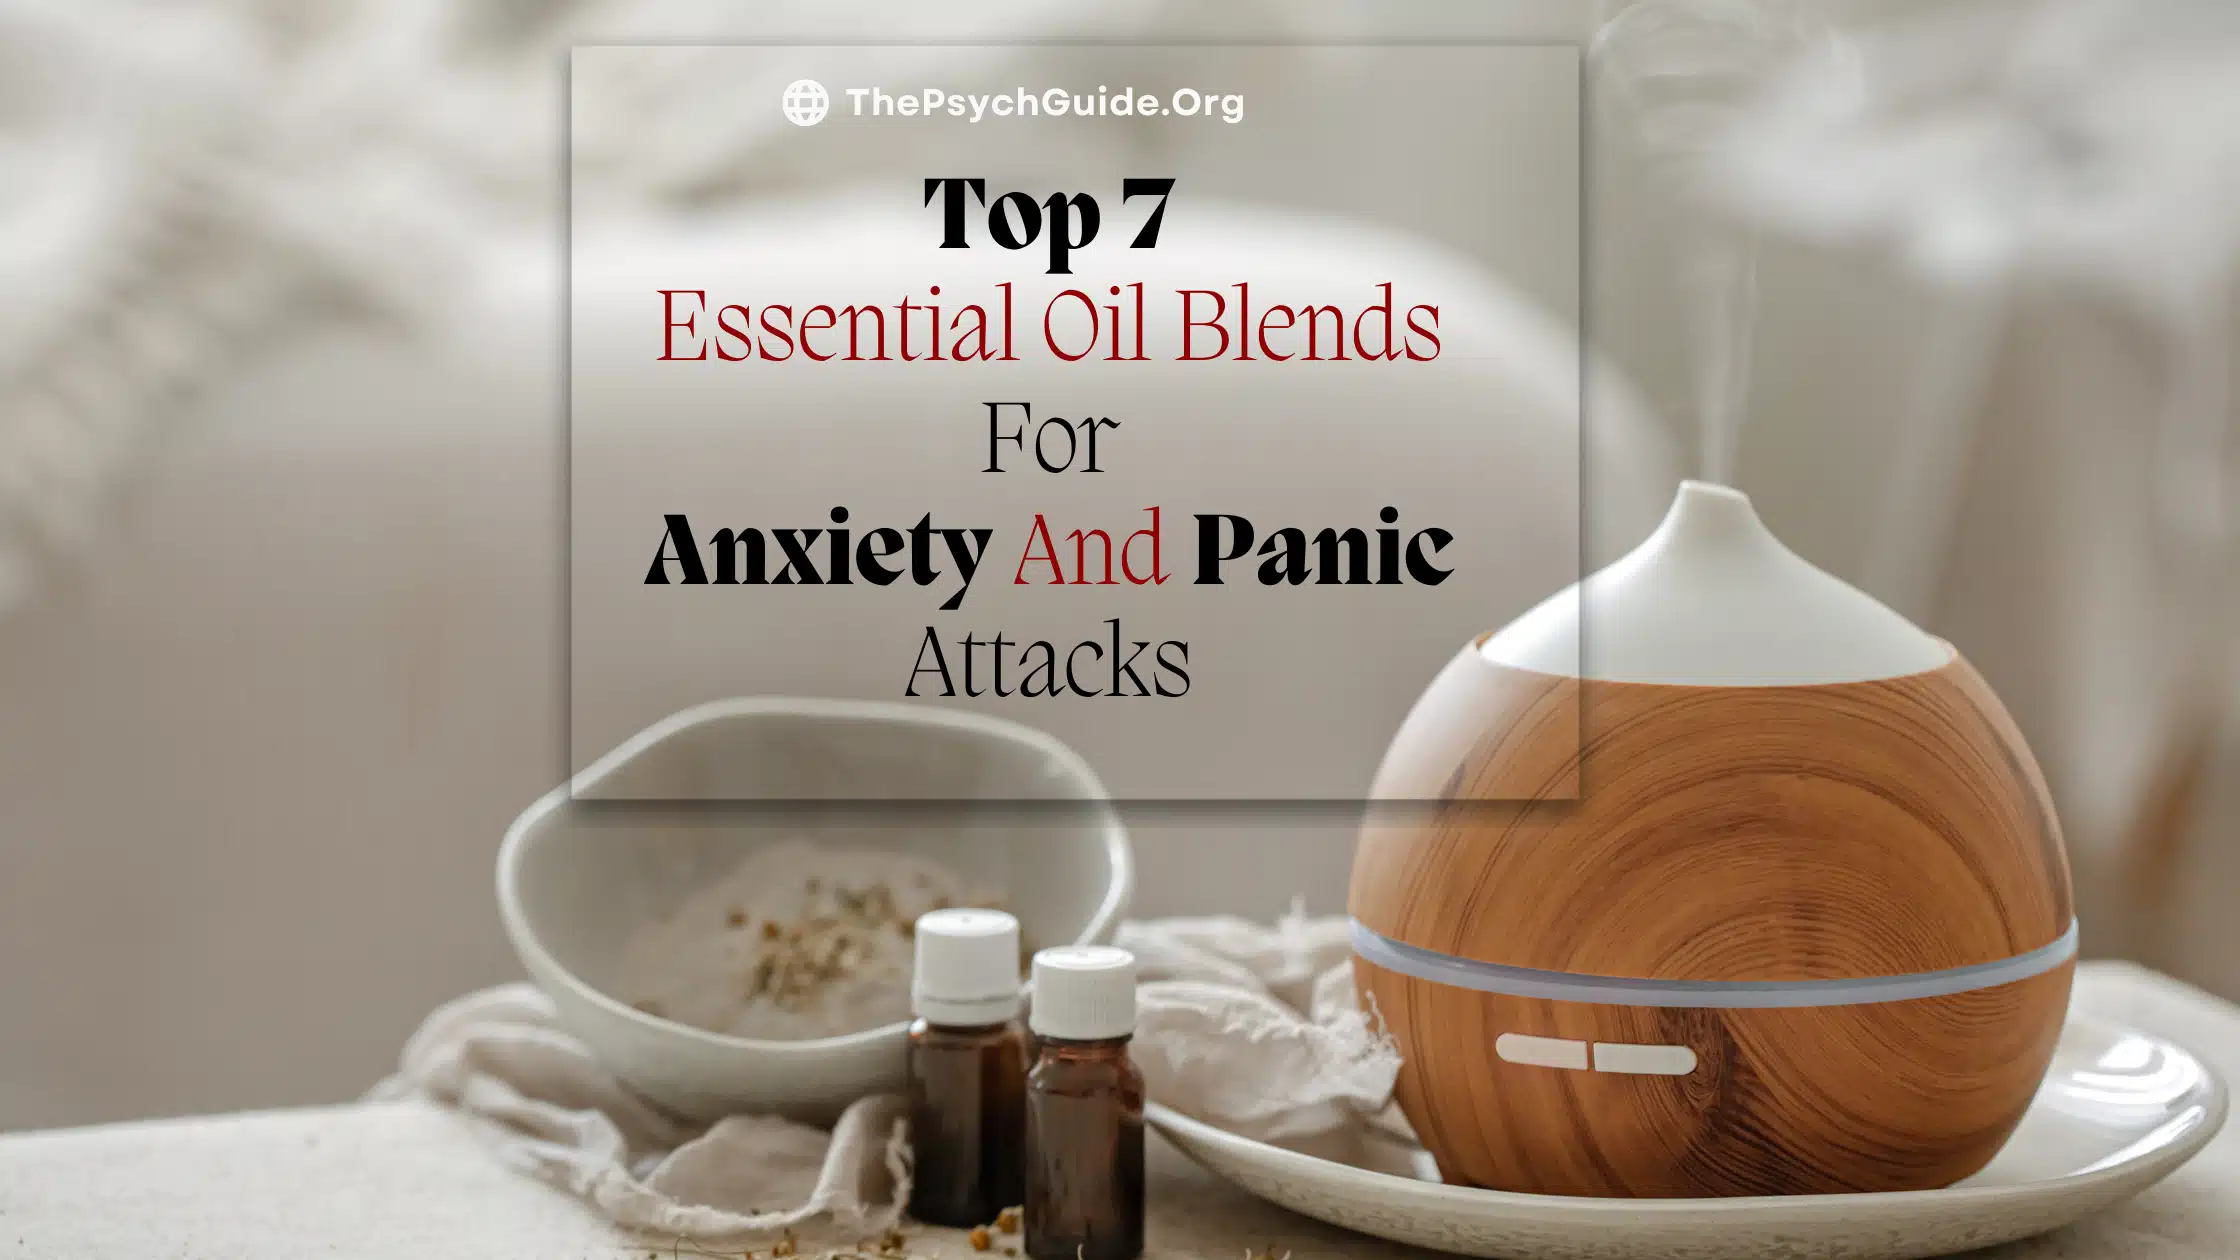 Essential oil blends for anxiety and panic attacks